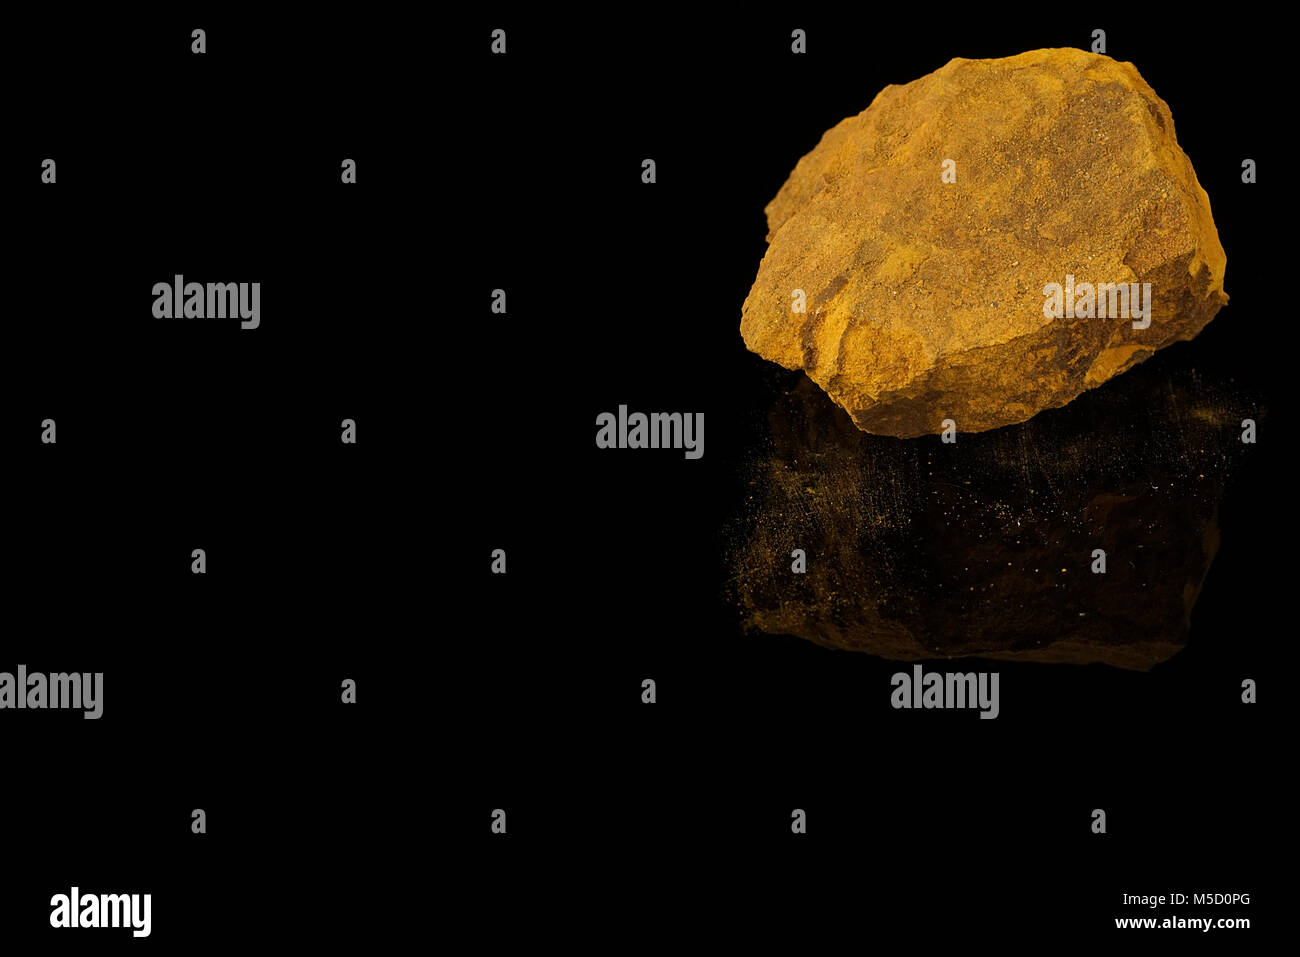 Limonite, iron ore mineral, iron oxide-hydroxide, amorphous, mineraloid, fine grained aggregate with powdery coating isolated on black background.rock Stock Photo